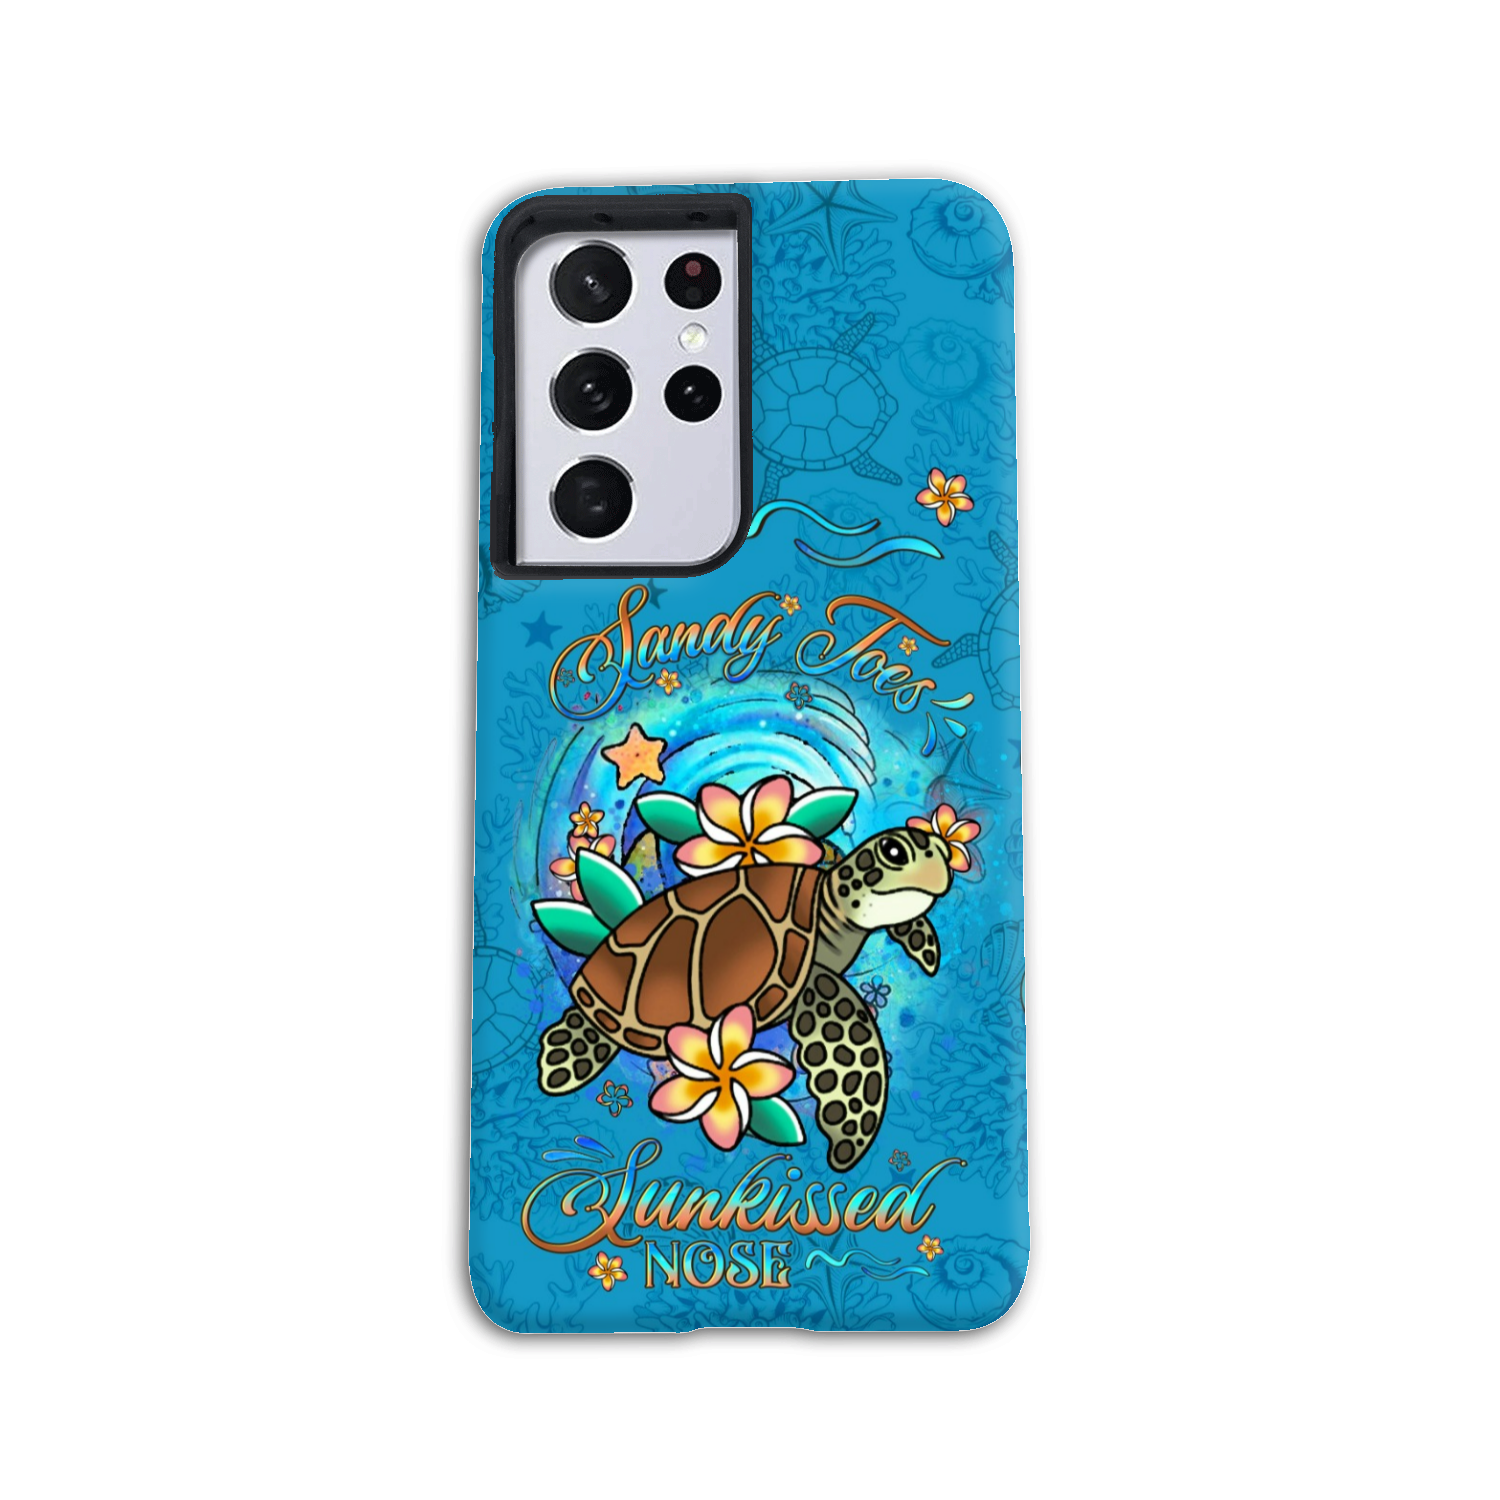 SANDY TOES SUNKISSED NOSE PHONE CASE - YHDU0906232